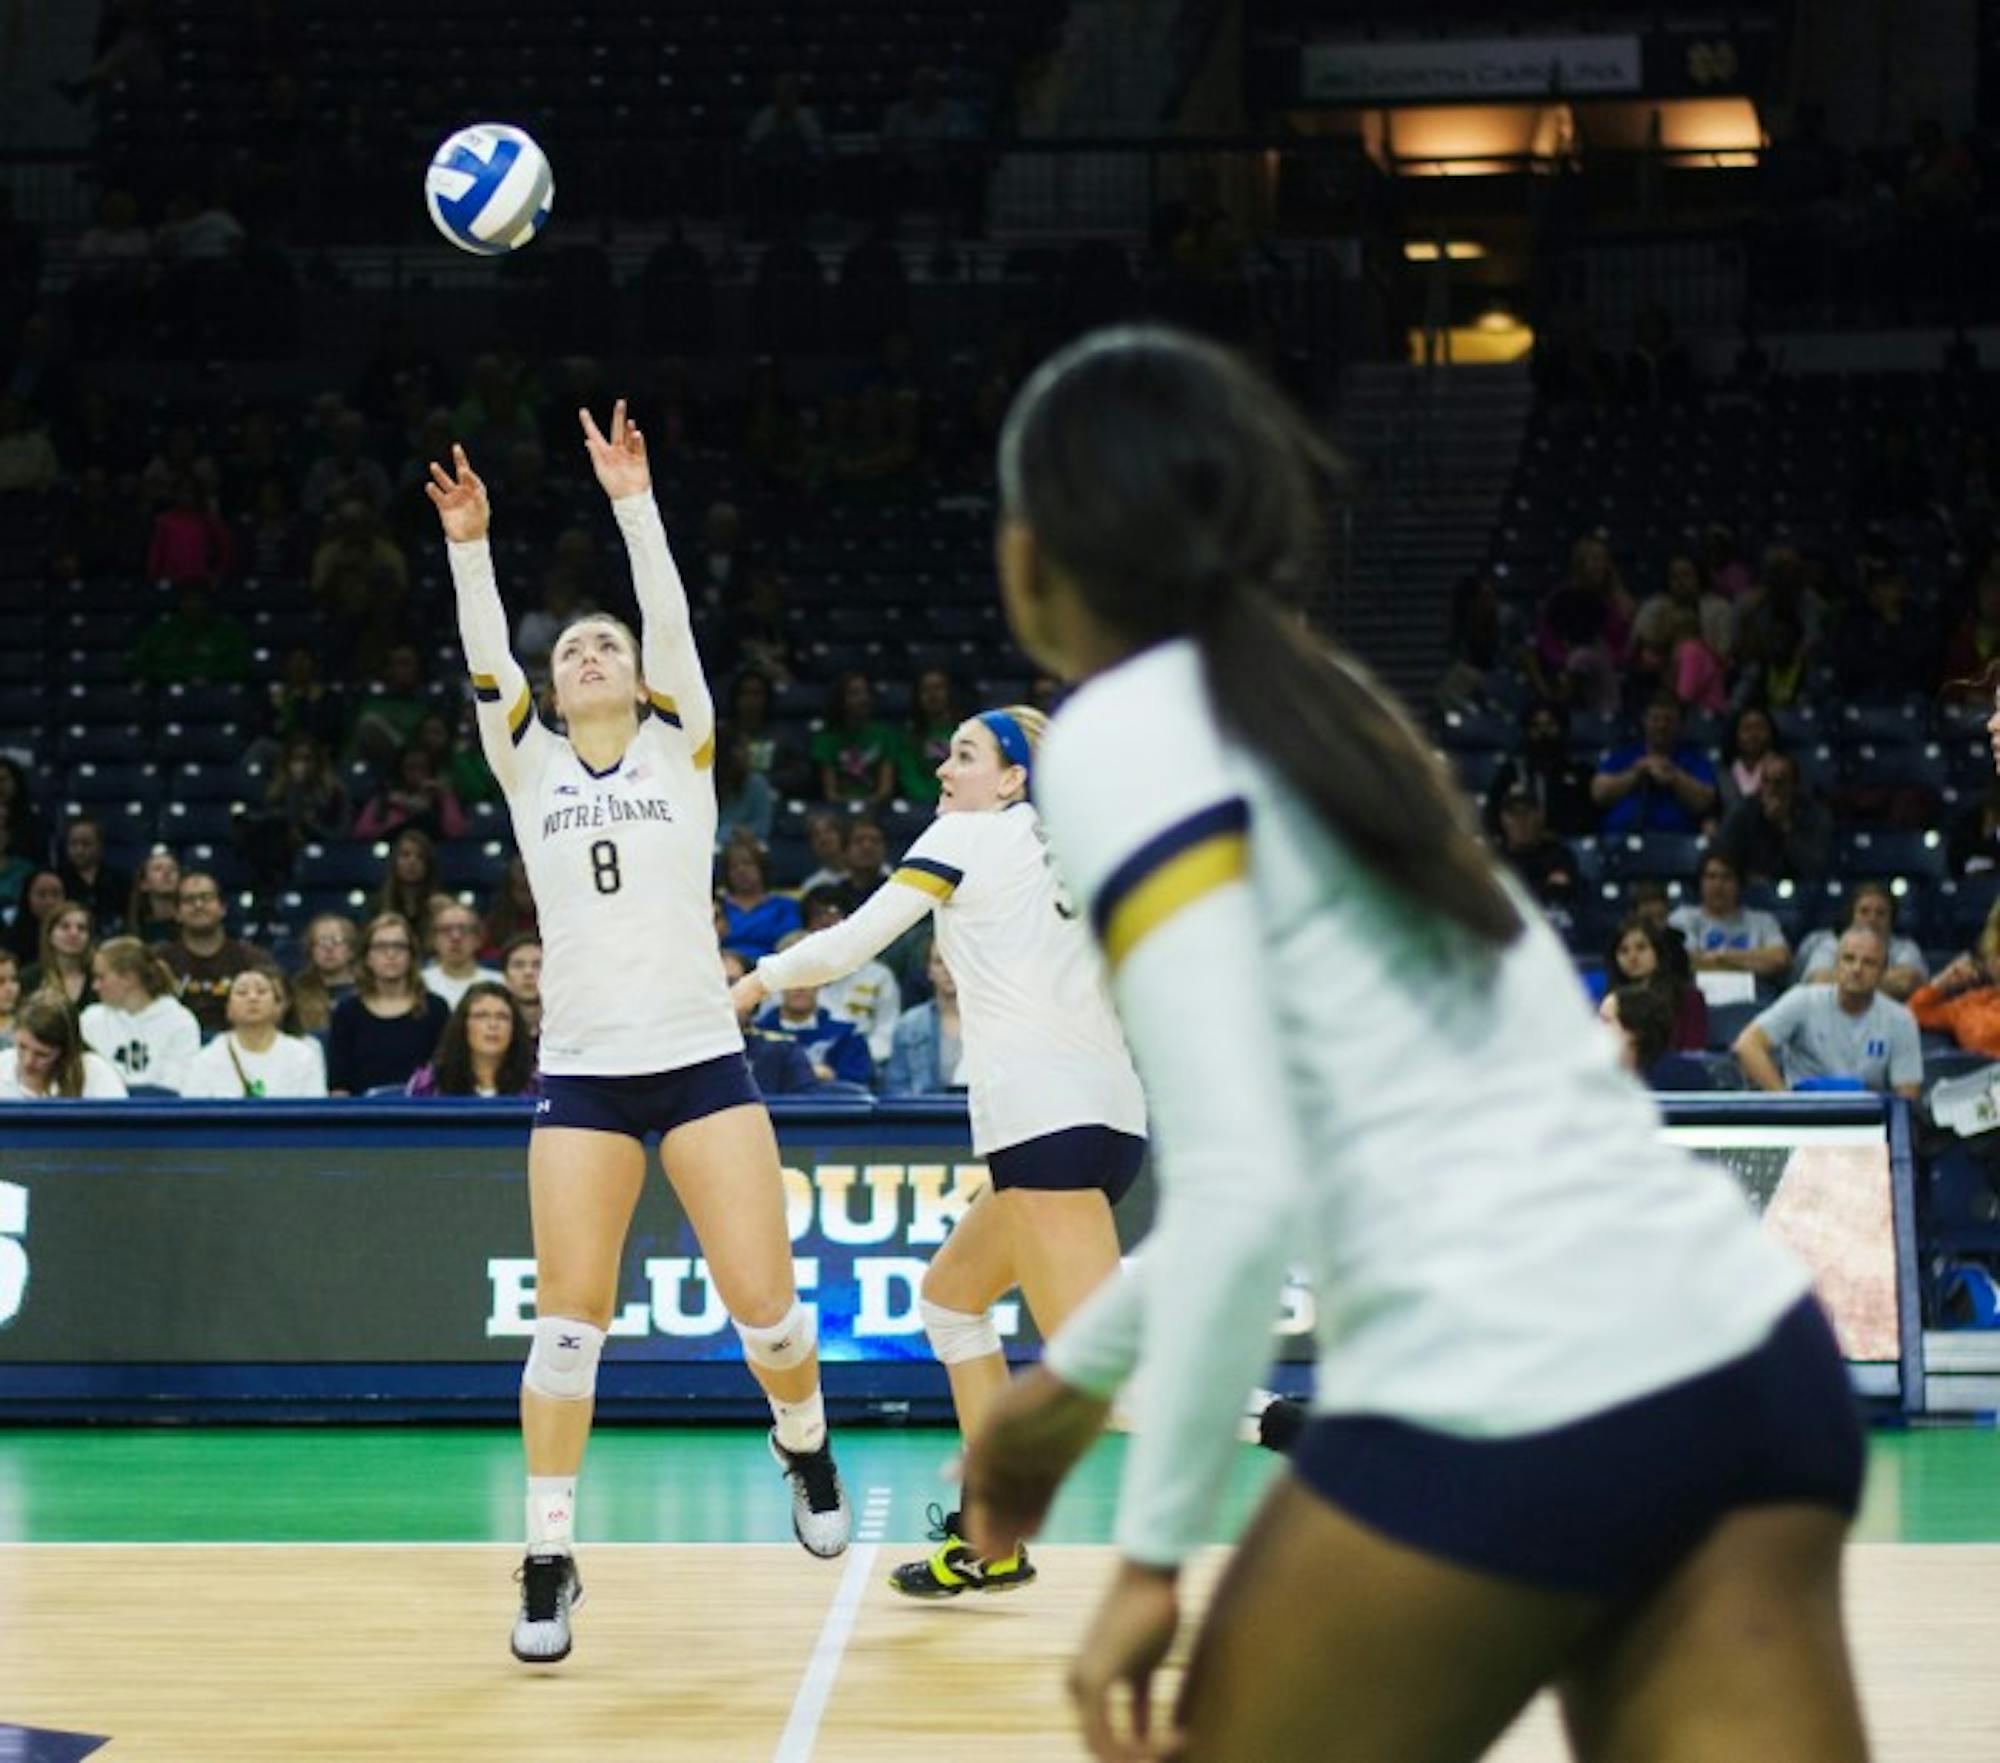 Irish junior setter Caroline Holt sets up a spike during Notre Dame’s 3-1 win over Duke on Sept. 30 at  Purcell Pavilion. Holt has 834 assists so far this season, and she is averaging nearly 11 assists per set.